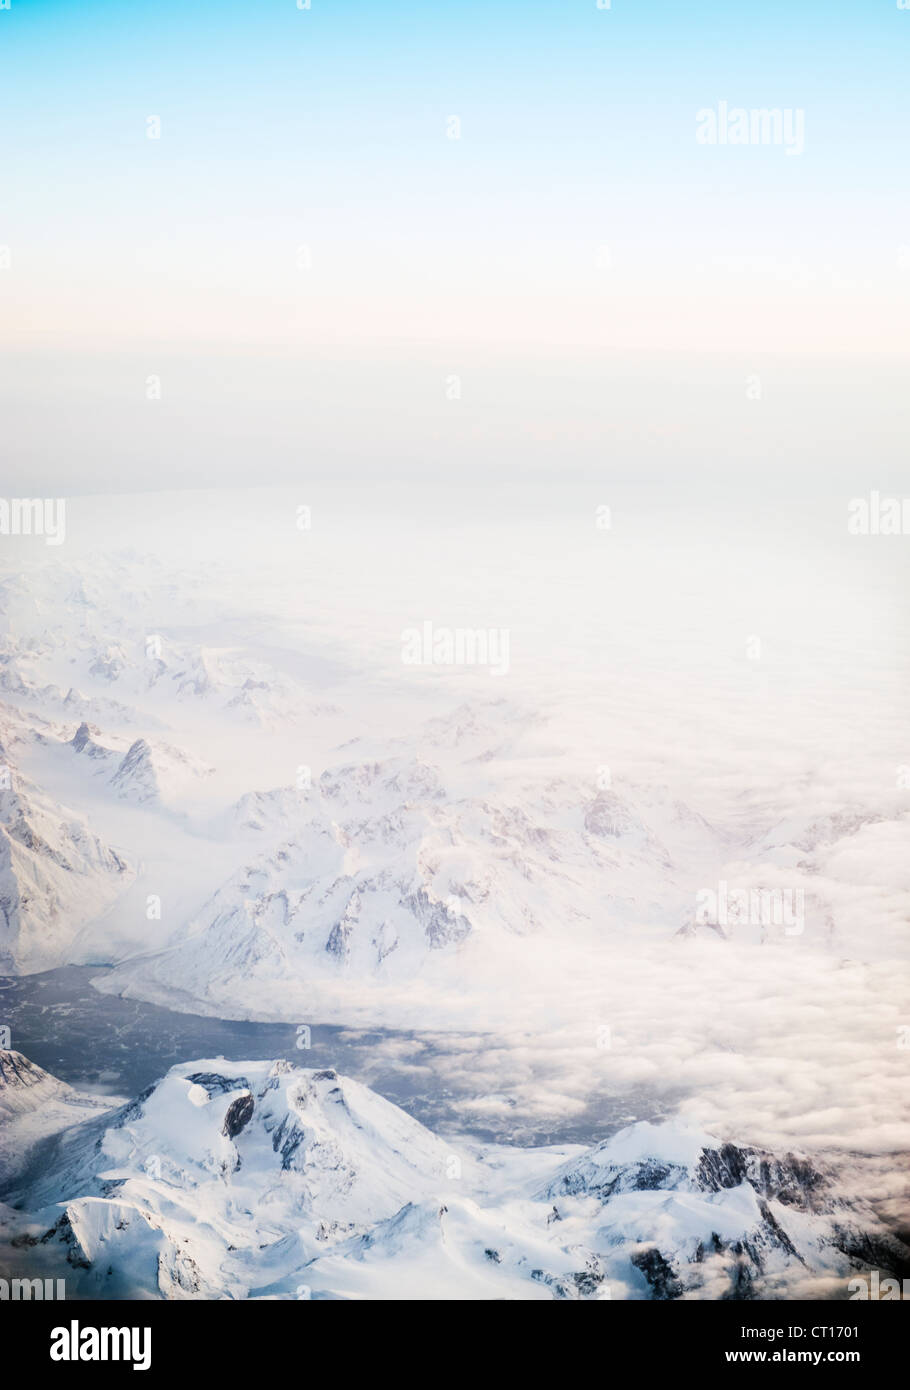 Fog rolling over snowy mountains Stock Photo